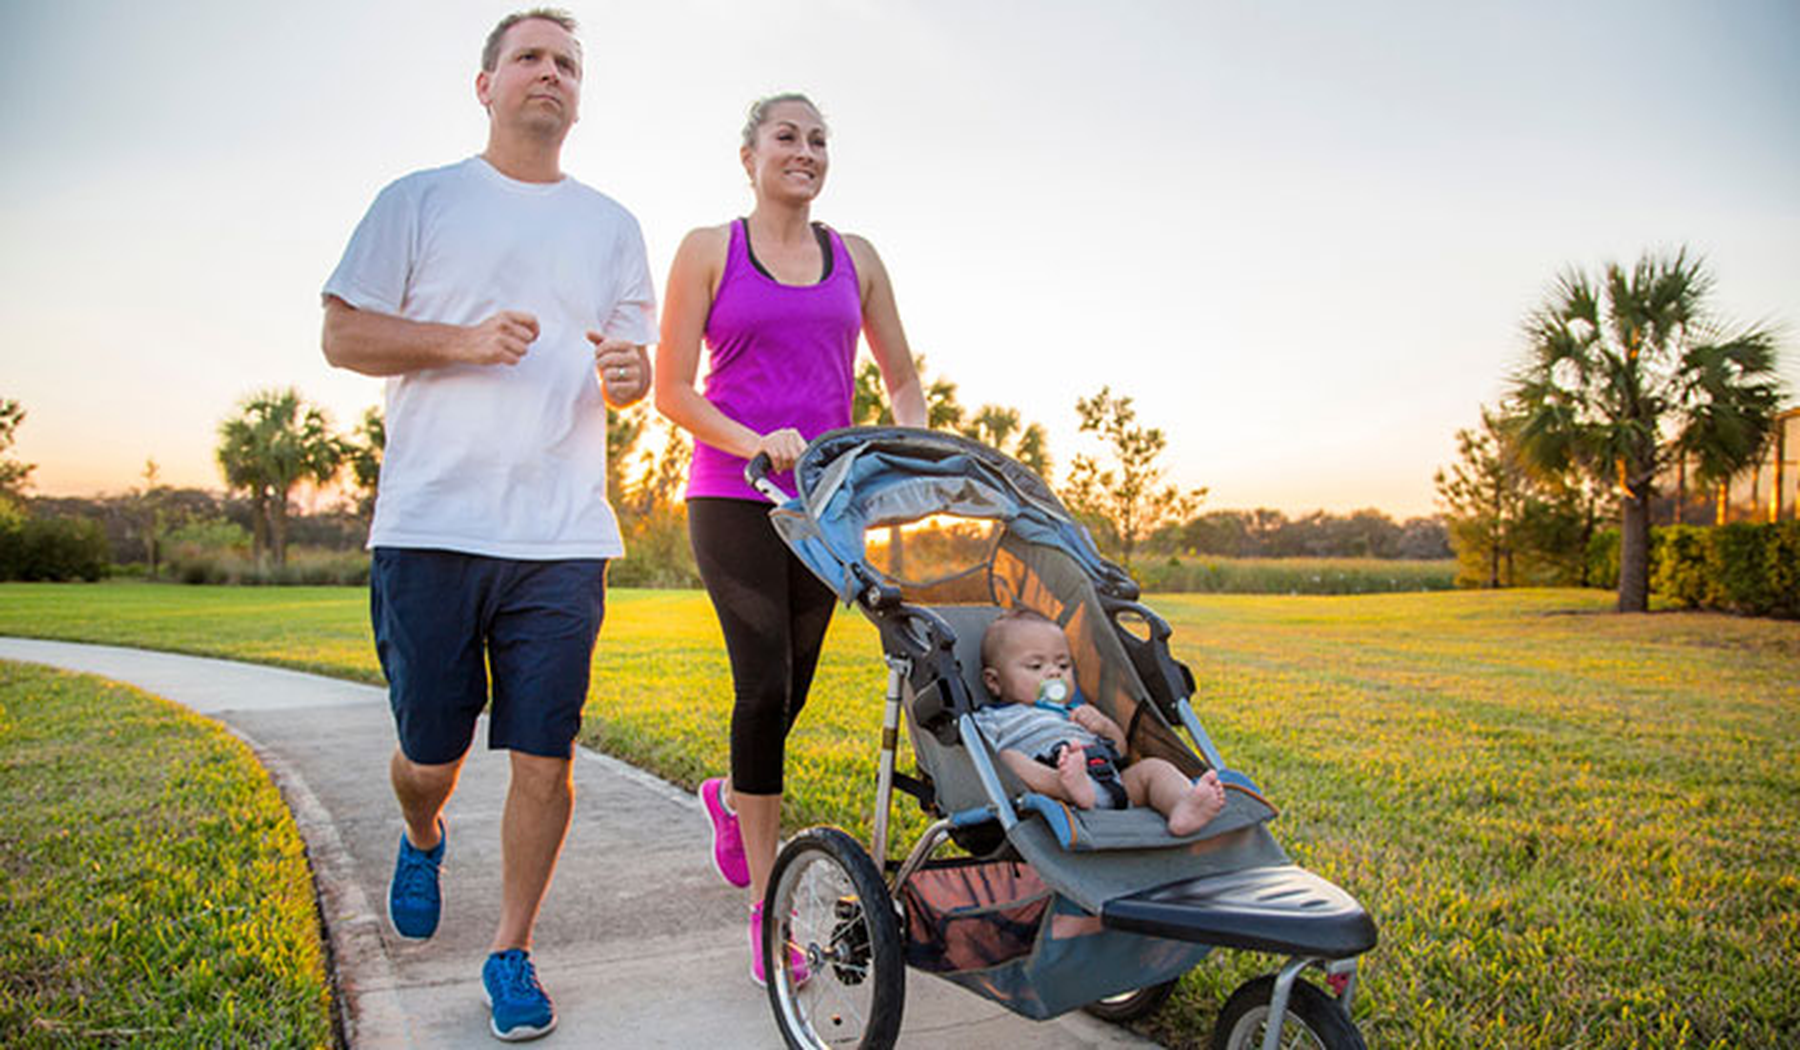 Man and woman jogging with baby in a stroller